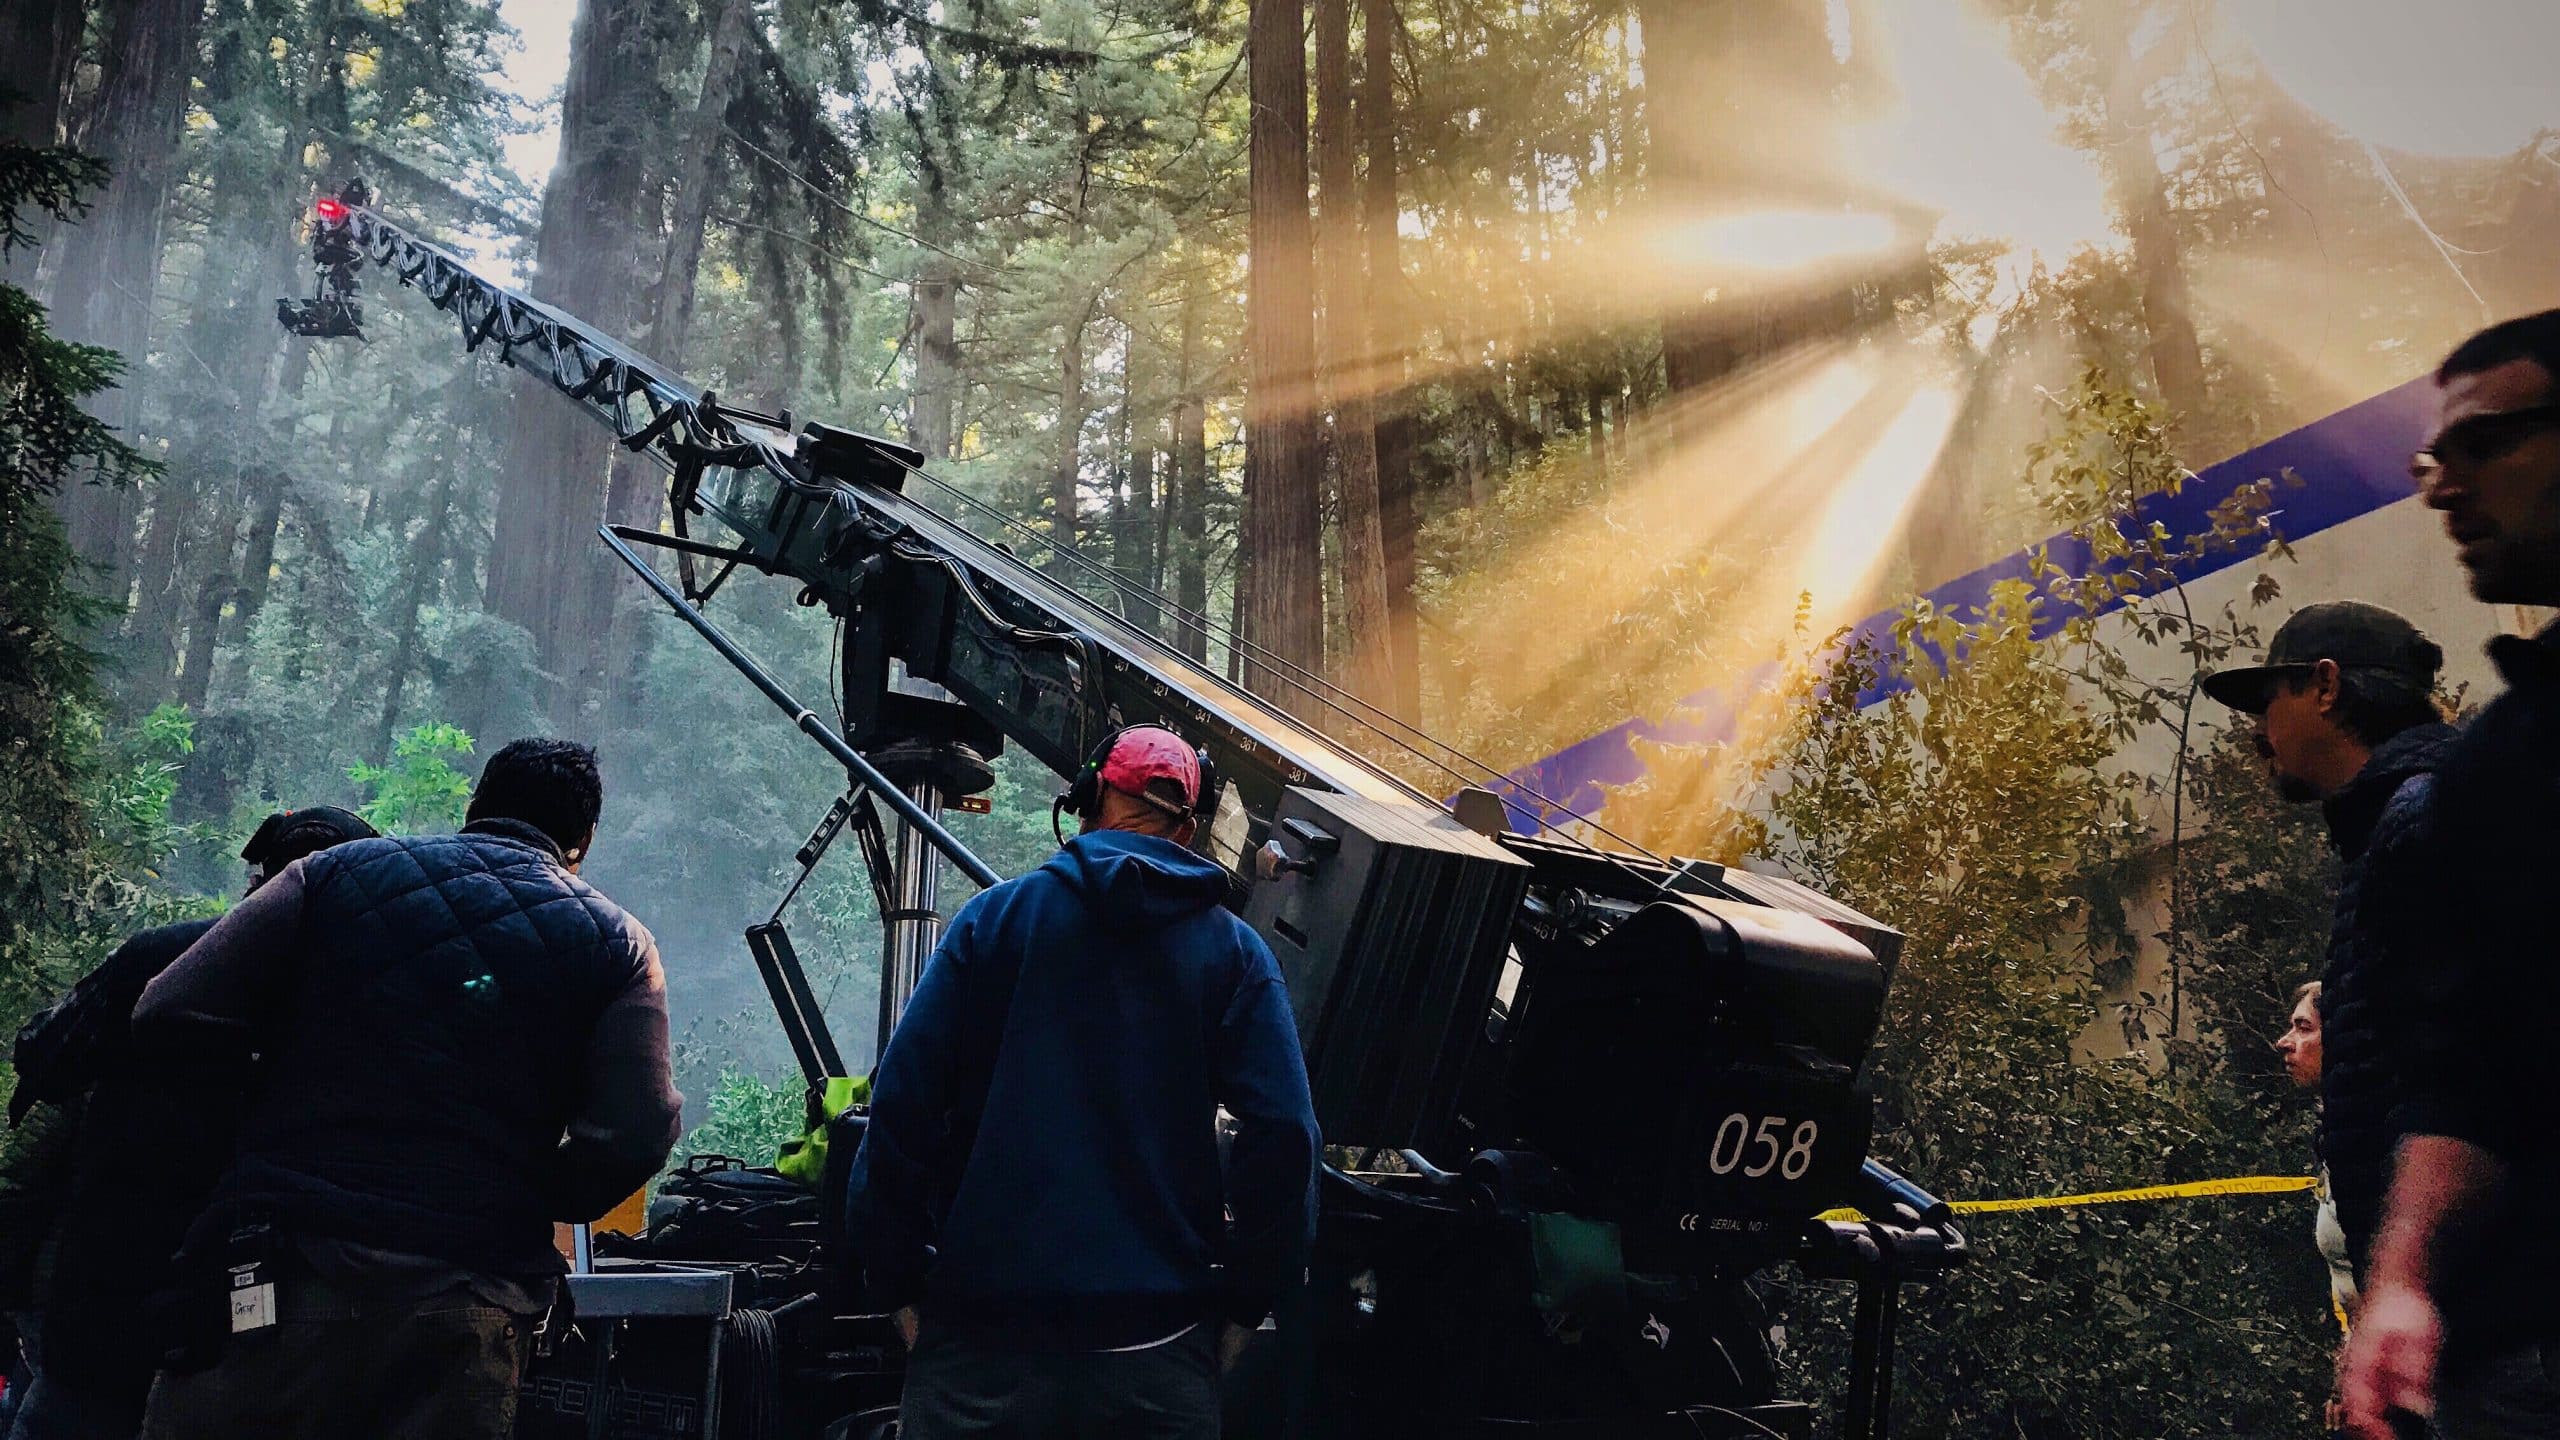 Camera crane shooting a movie in the forest